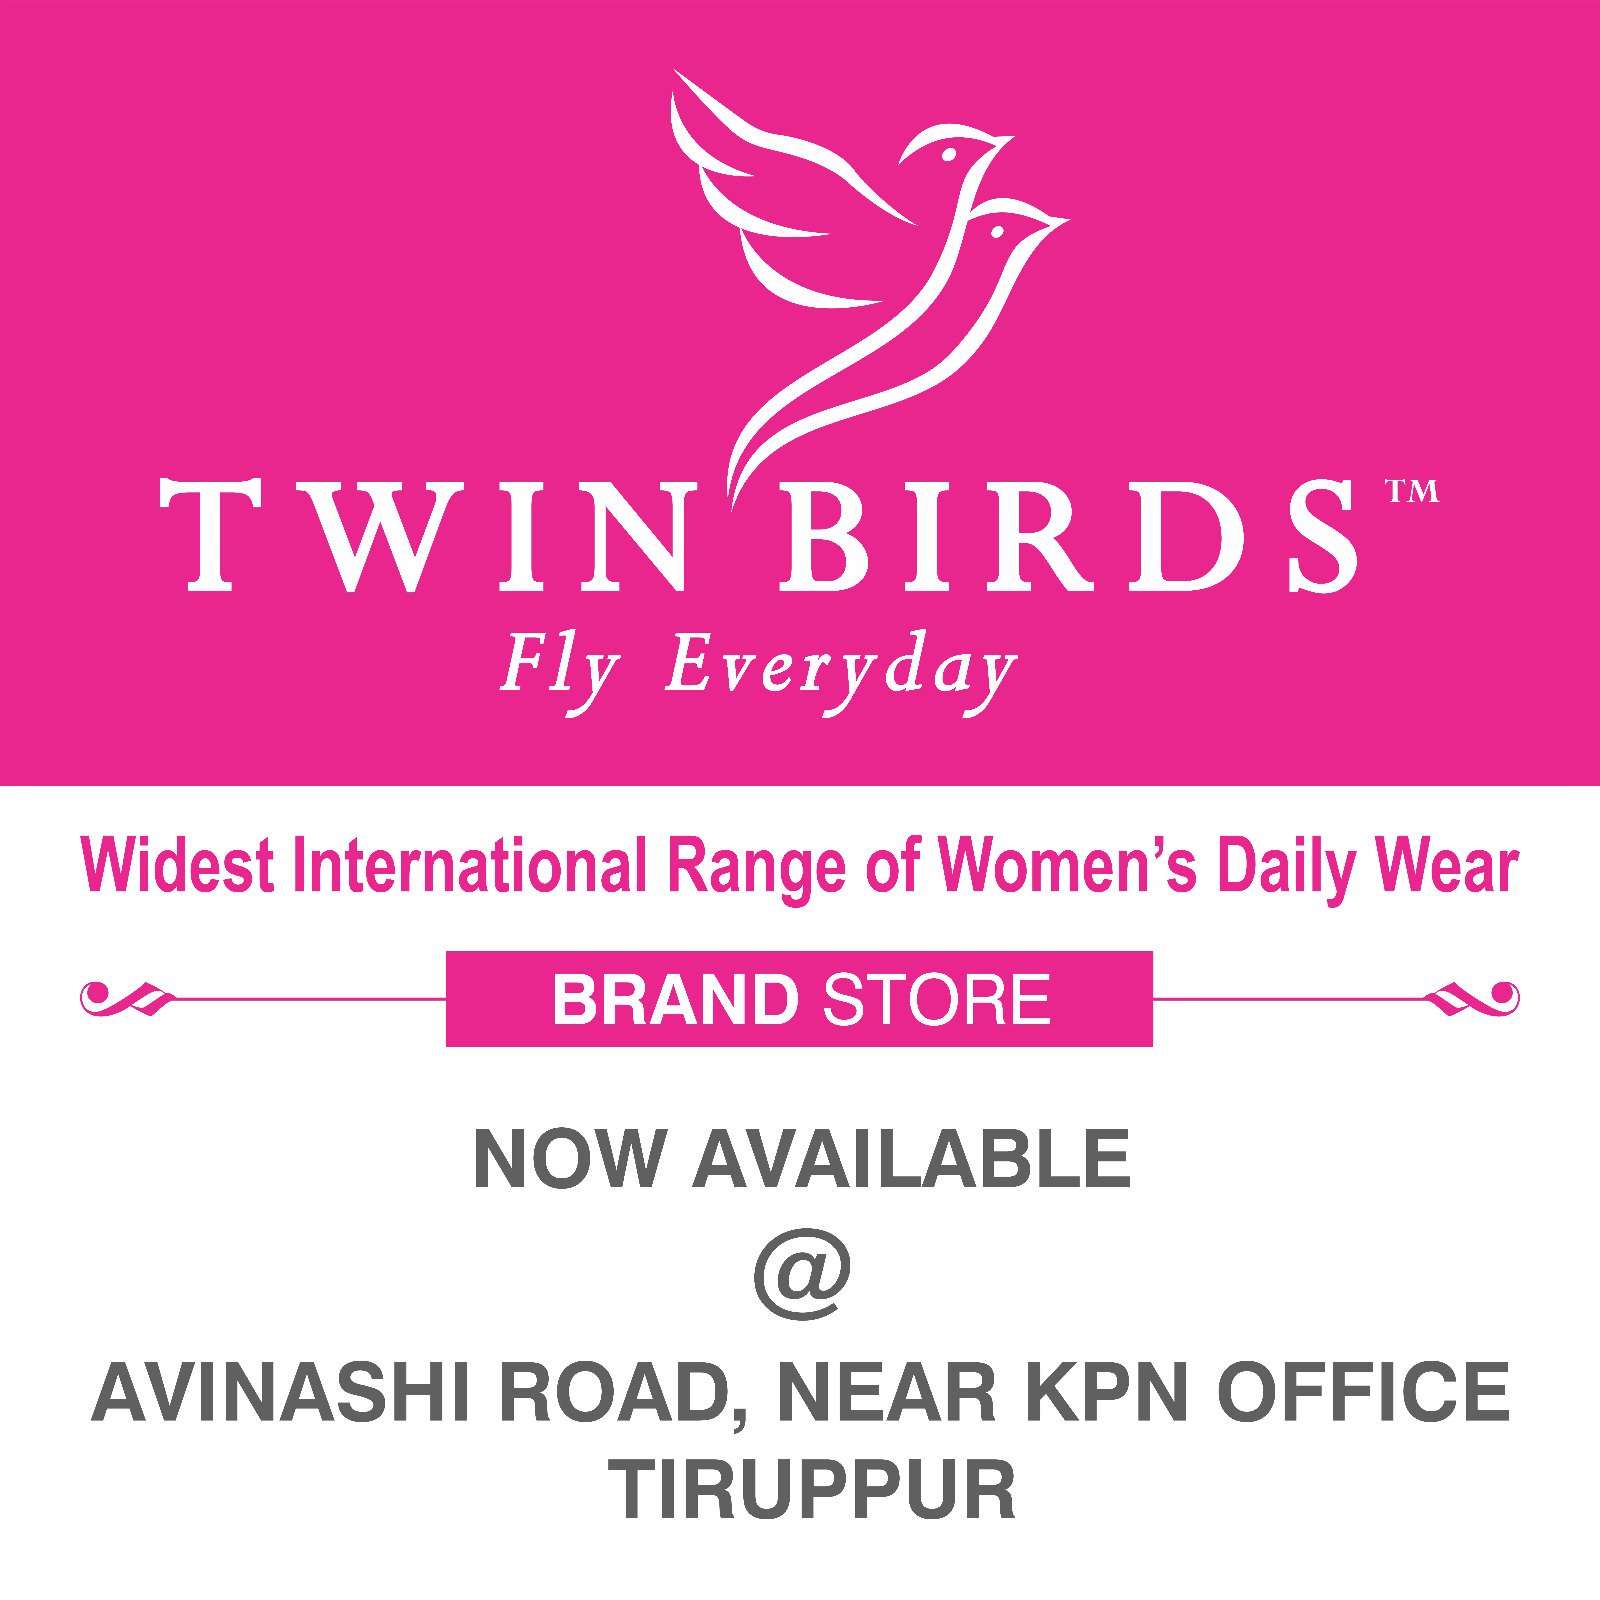 Twin Birds Online - Be your 'best-dressed self' wherever you go